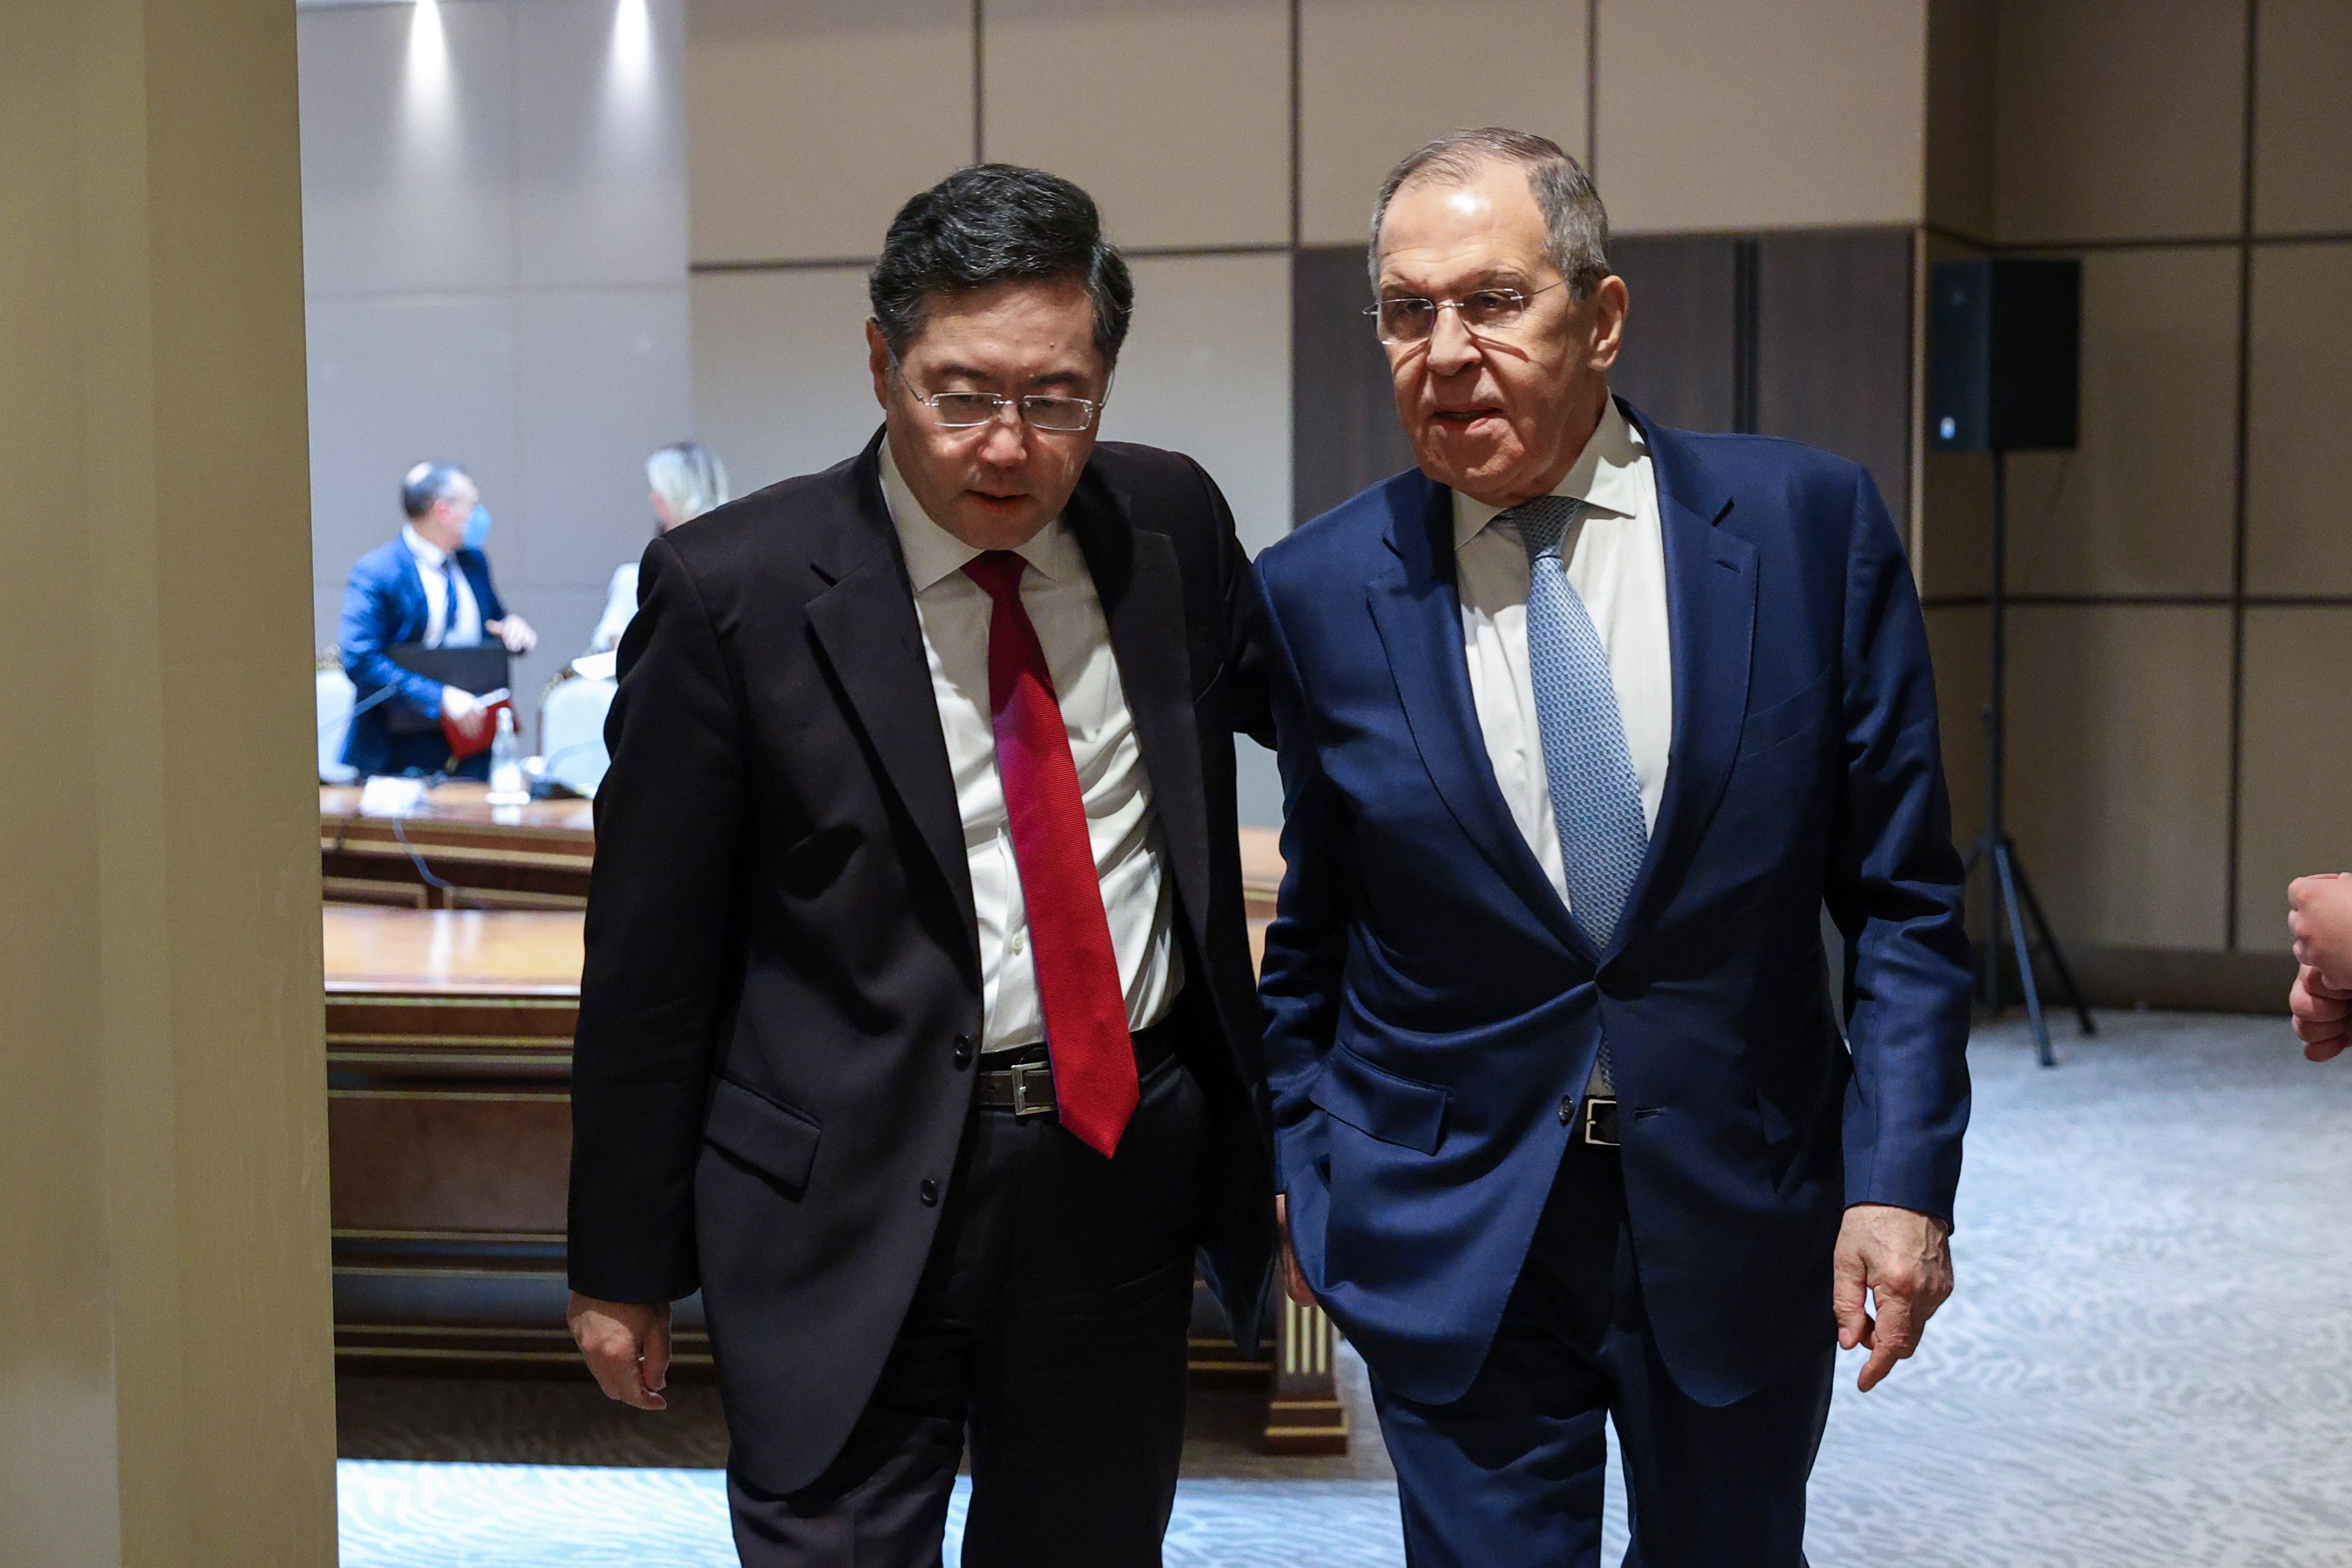 Chinese Foreign Minister Qin Gang (left) and his Russian counterpart Sergey Lavrov meet in Samarkand, Uzbekistan on Thursday. Photo: EPA-EFE